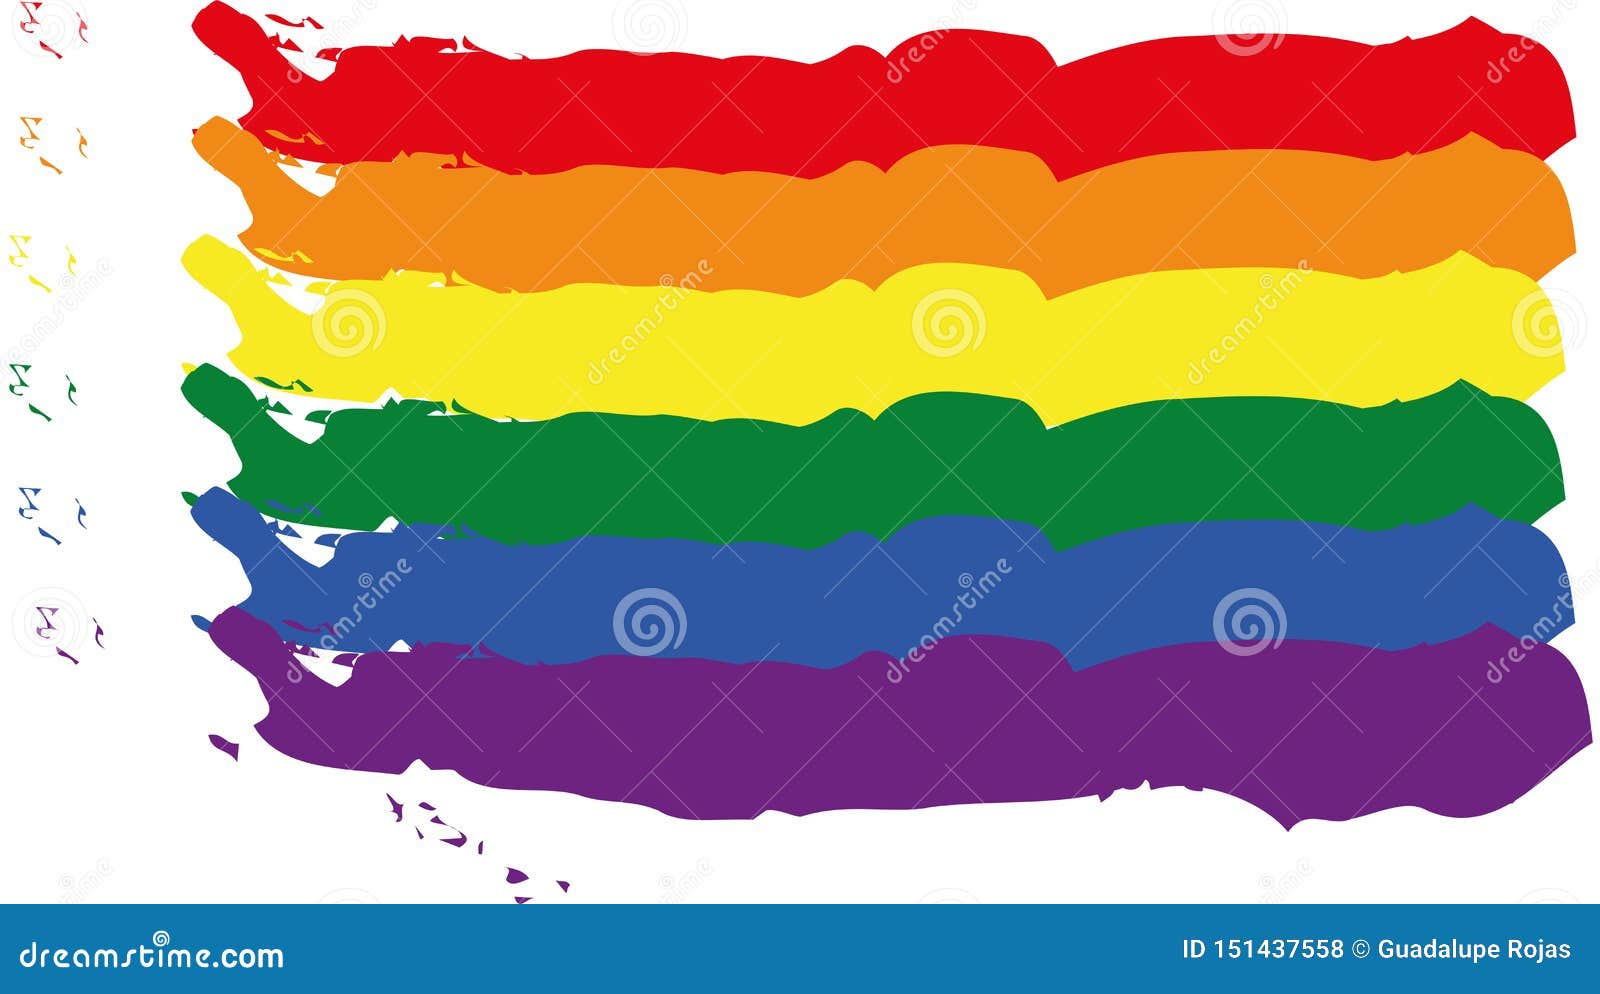  image of the lgbt flag